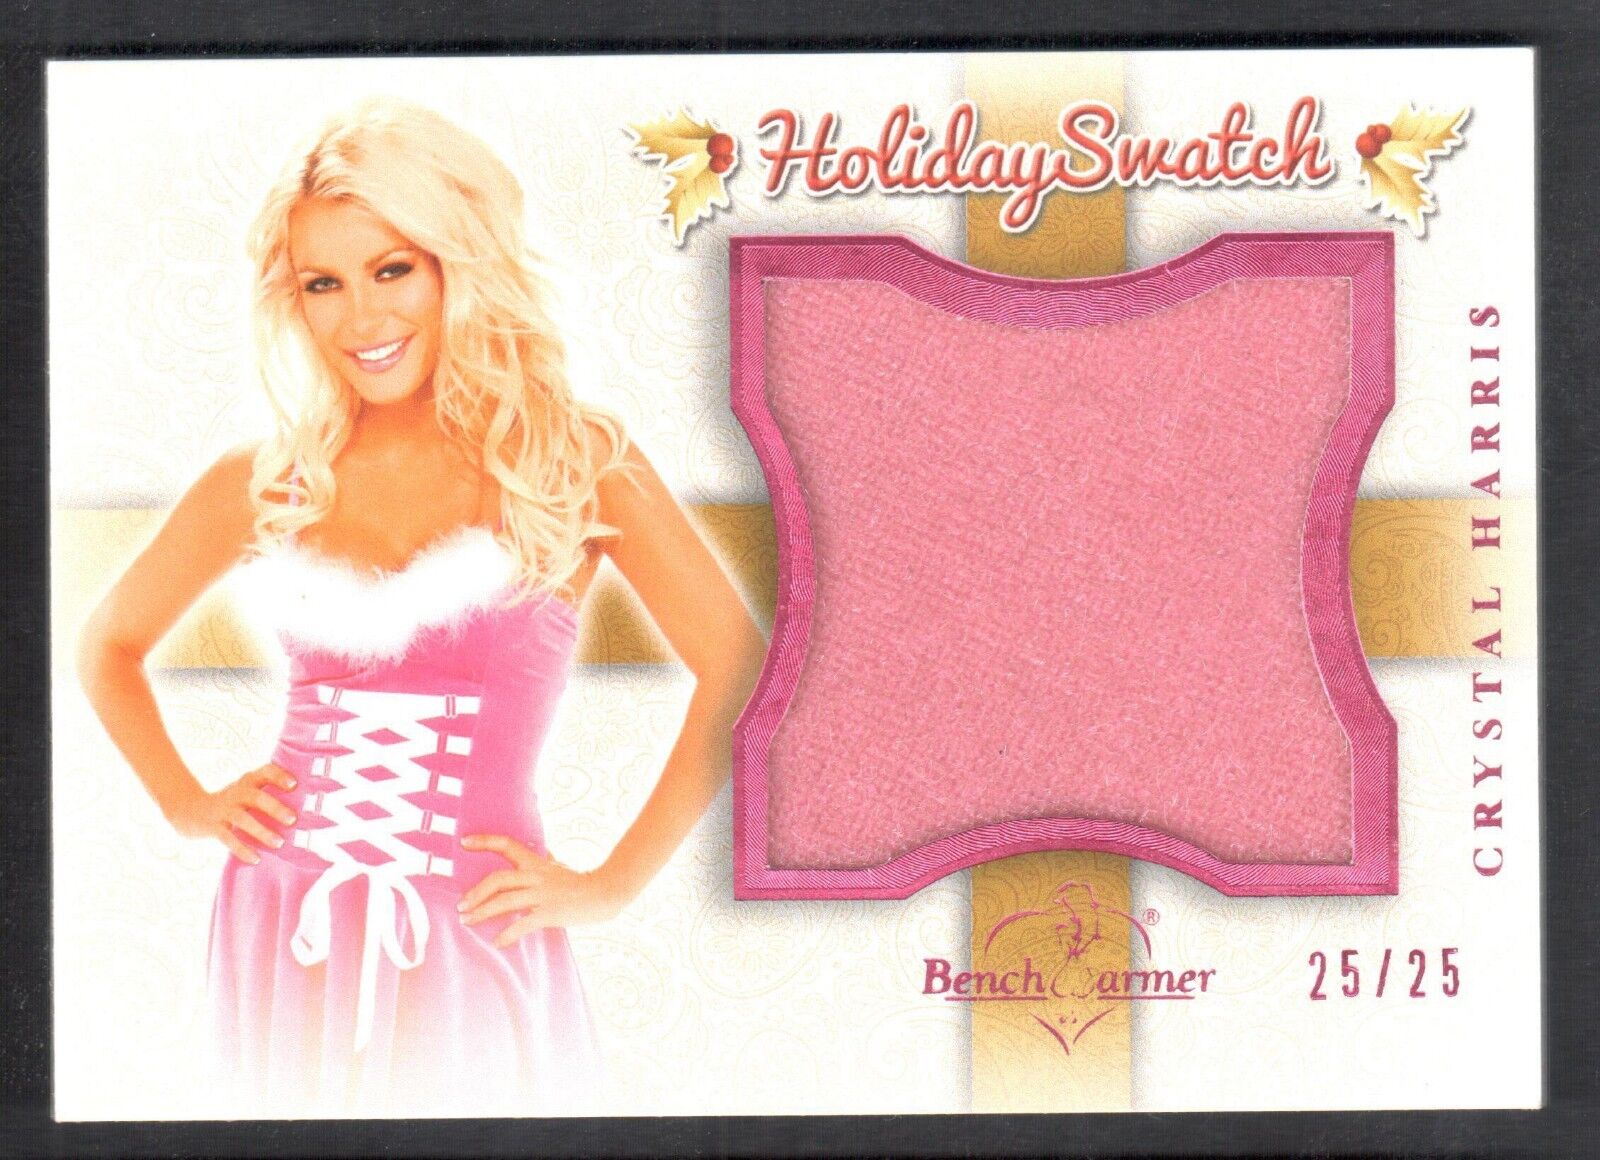 BENCH WARMER HAPPY HOLIDAYS 2012: PINK FOIL SWATCH Card Crystal Harris #25/25